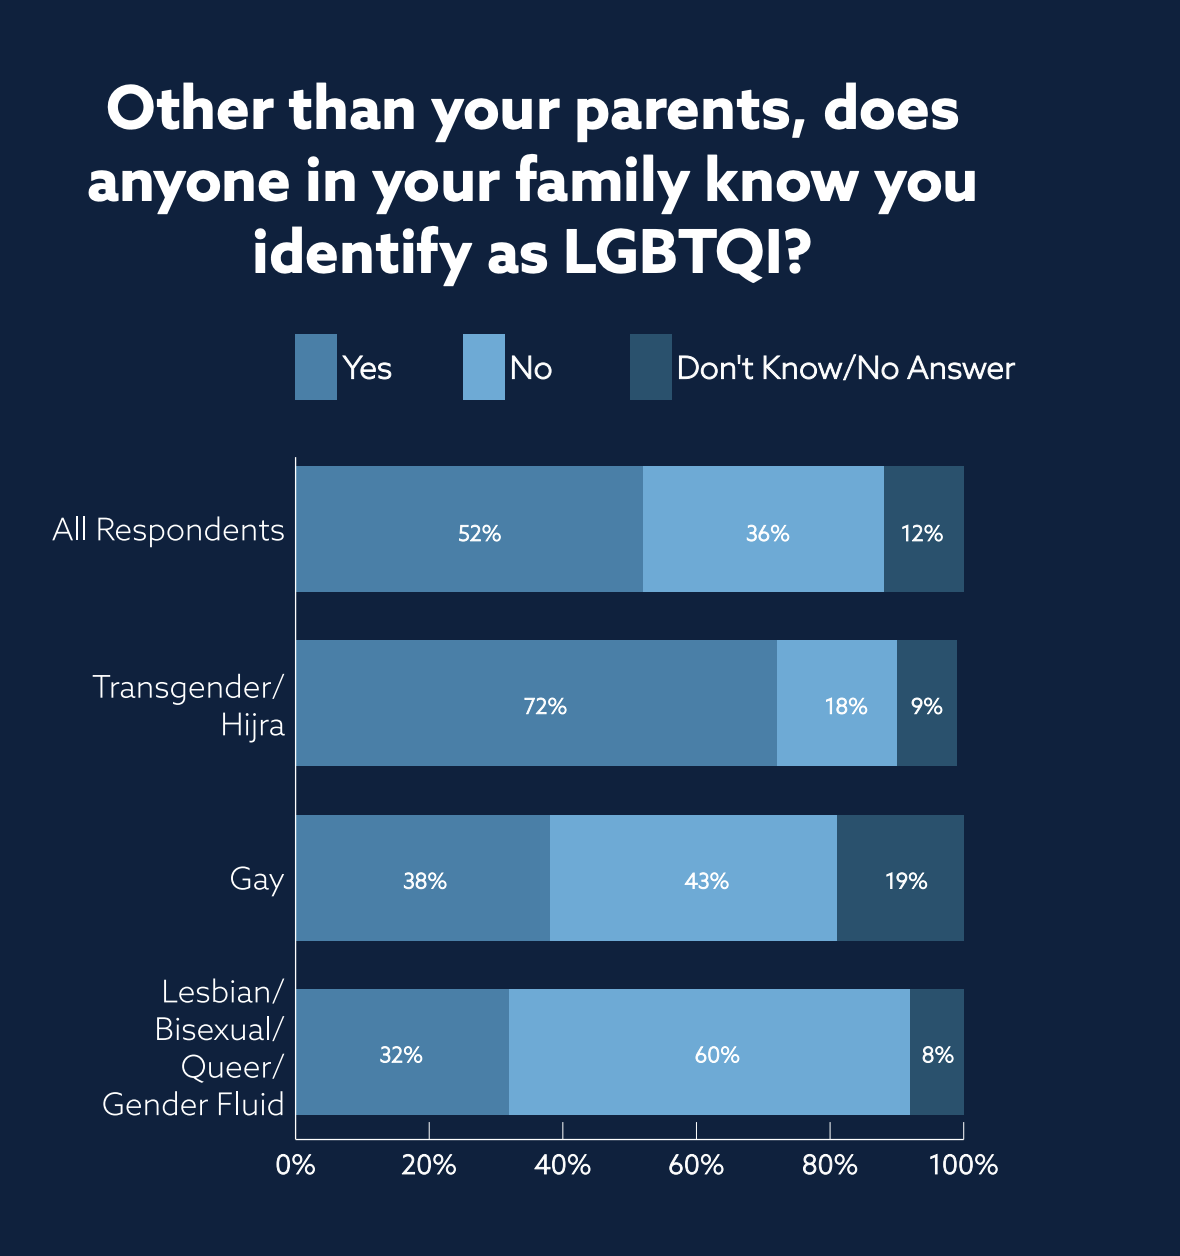 Other than your parents, does anyone in your family know you identify as LGBTQI?  A bar chart.  All respondents: 52% yes; 36% no; 12% don't know/no answer.  Also breaks the numbers down by transgender/hijra, gay, and lesbian/bisexual/queer/gender-fluid.